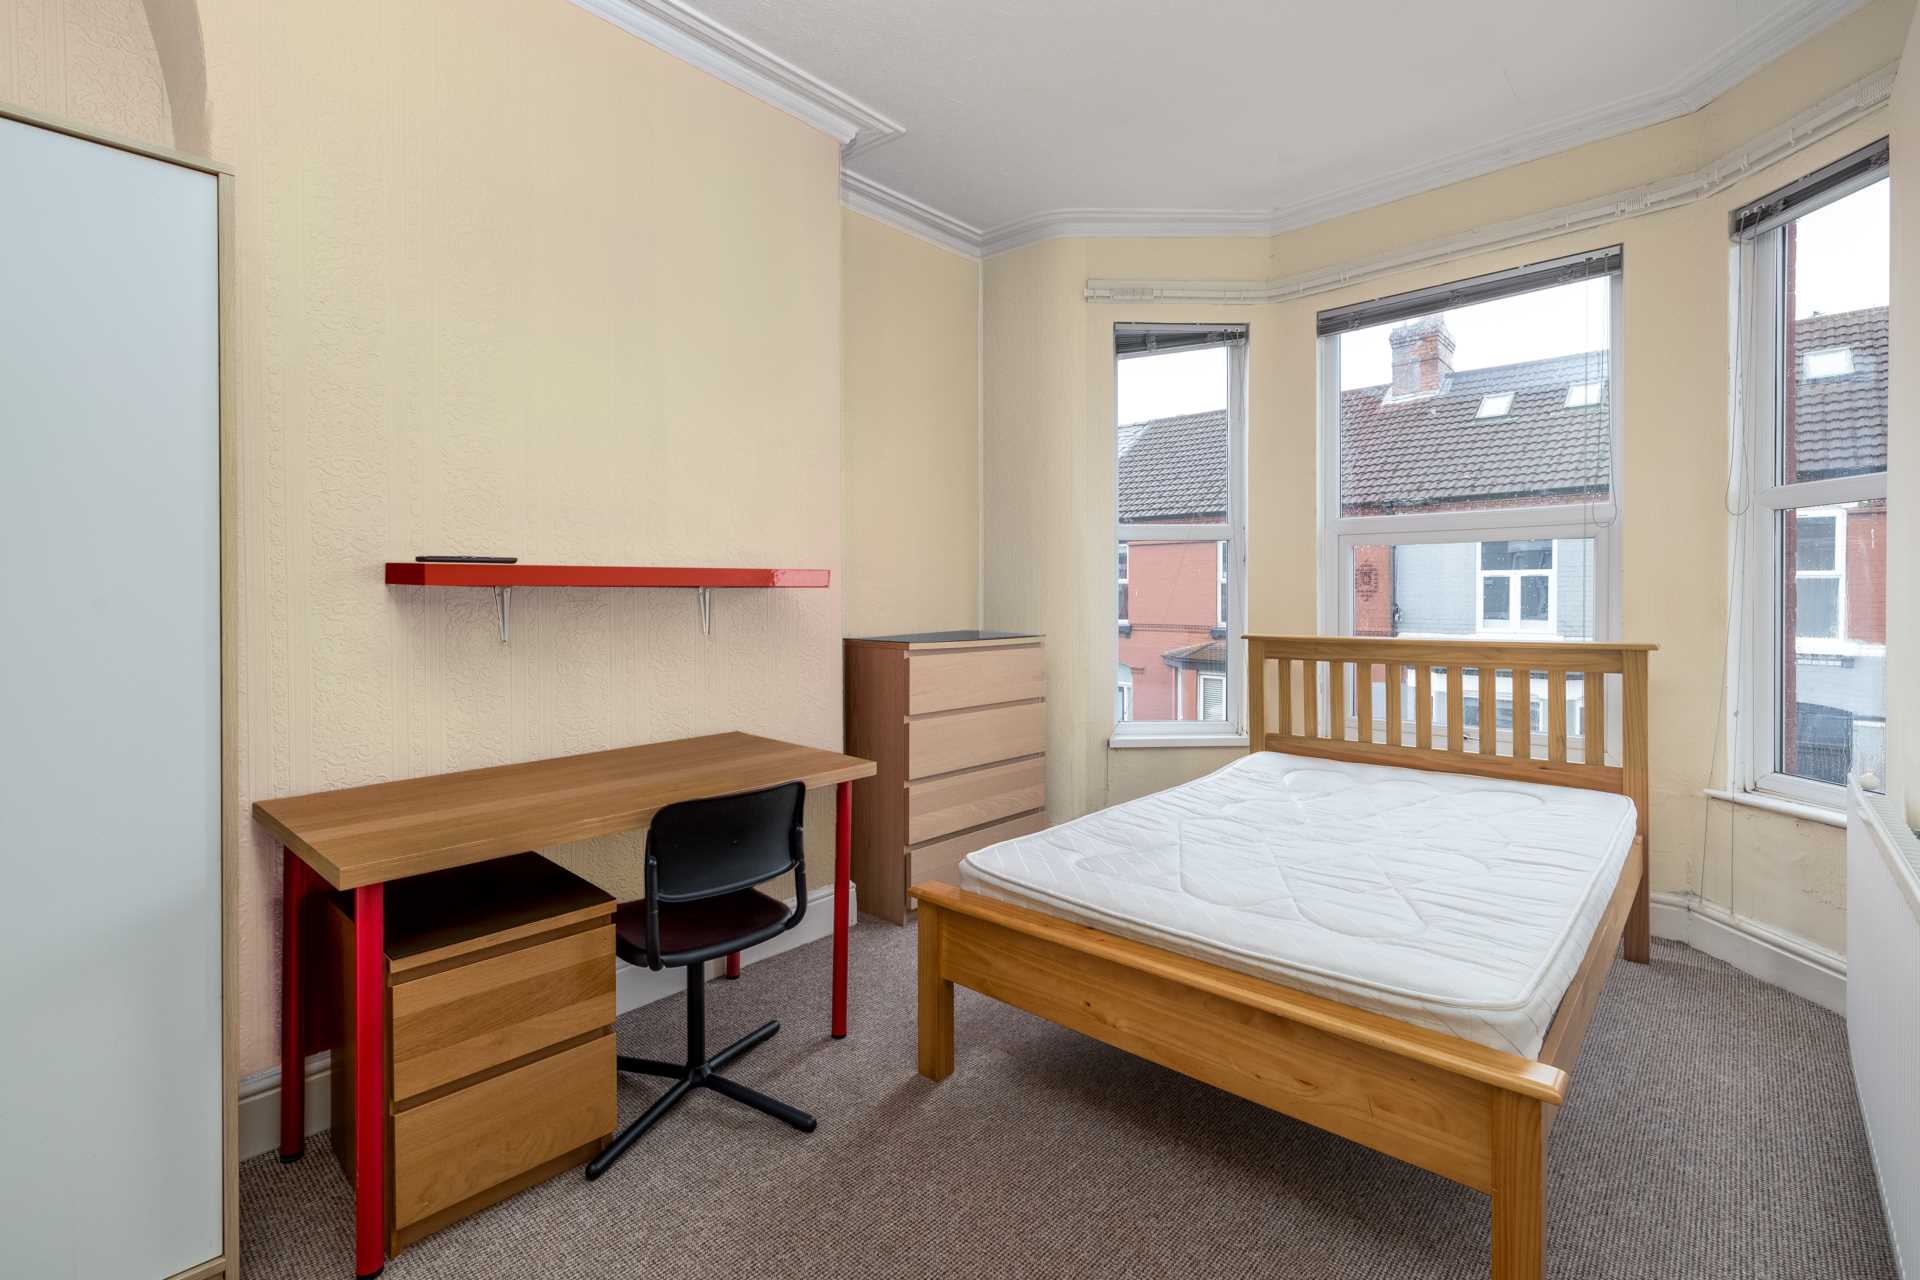 Garmoyle Road, Wavertree - NO DEPOSIT - BILLS INCLUDED - FIRST 2 MONTHS FREE, Image 7